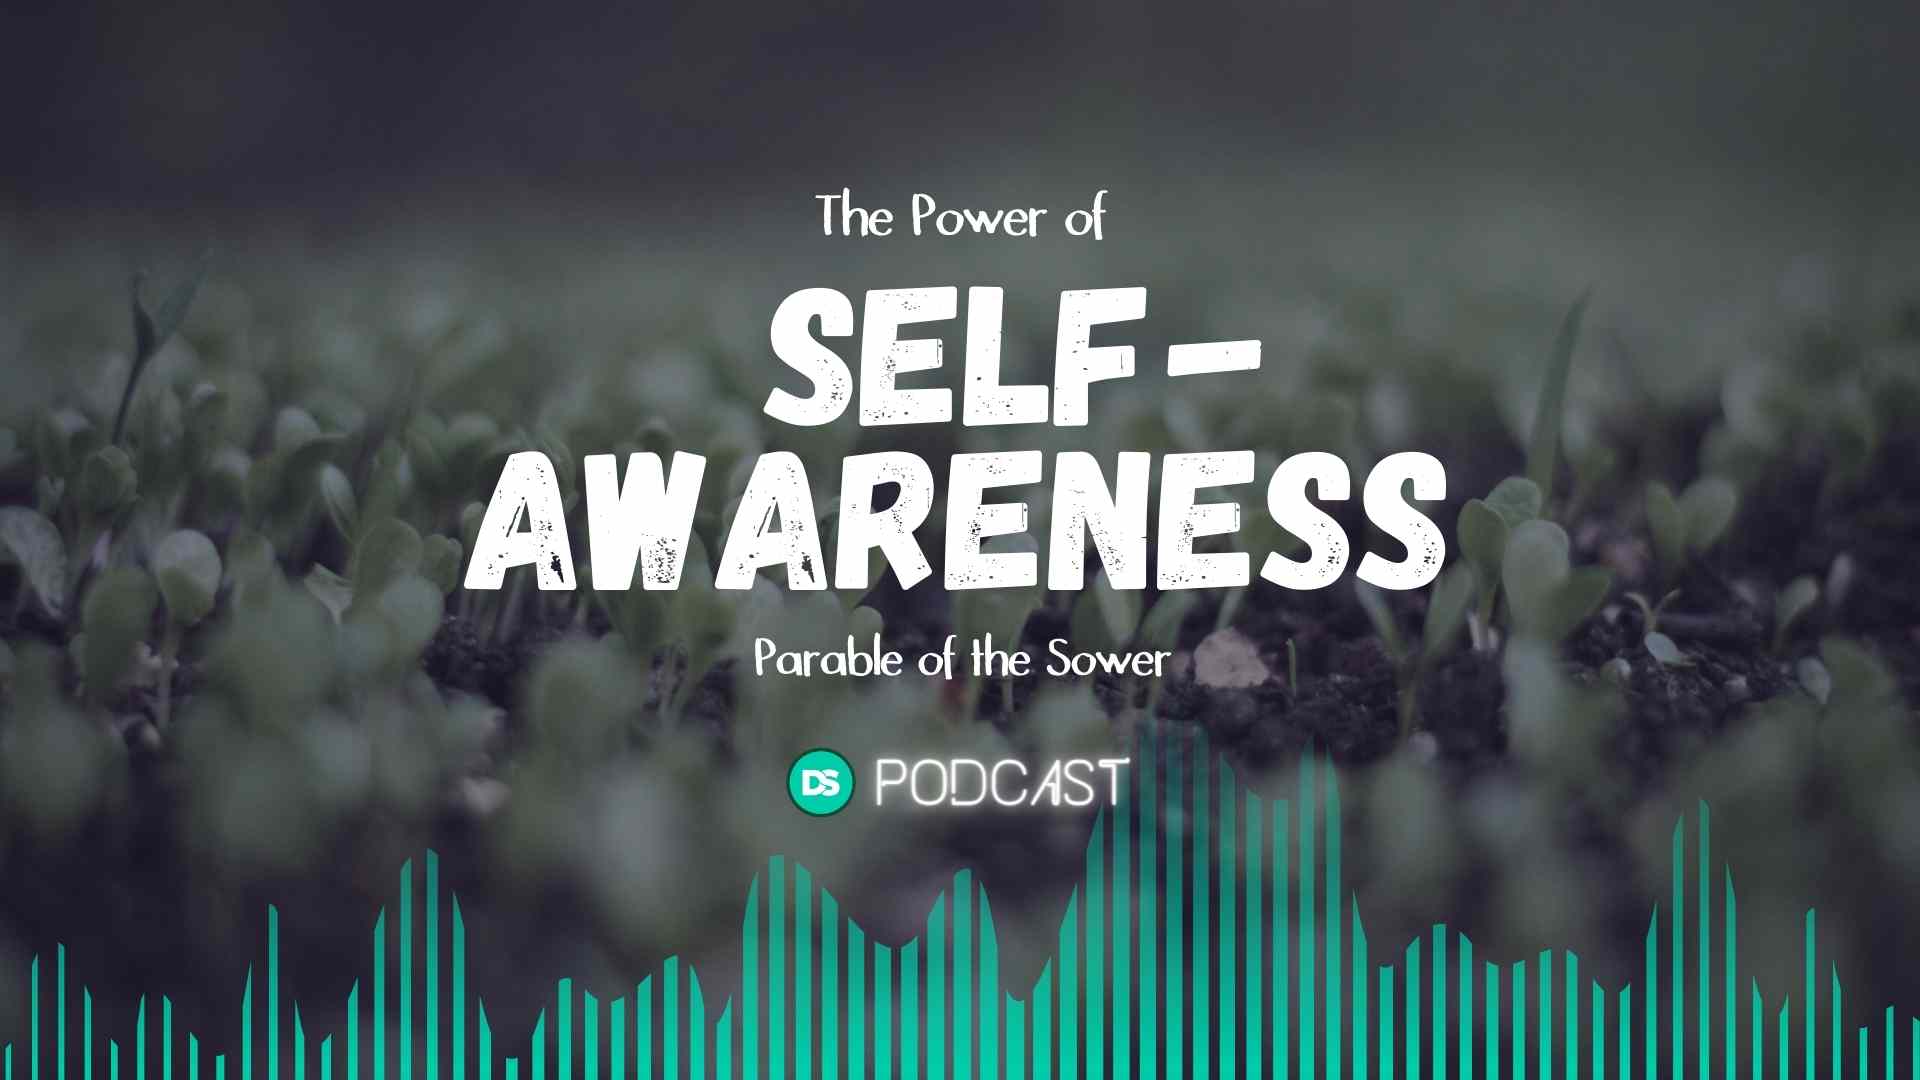 The Parable of the Sower and the Power of Self-Awareness 8